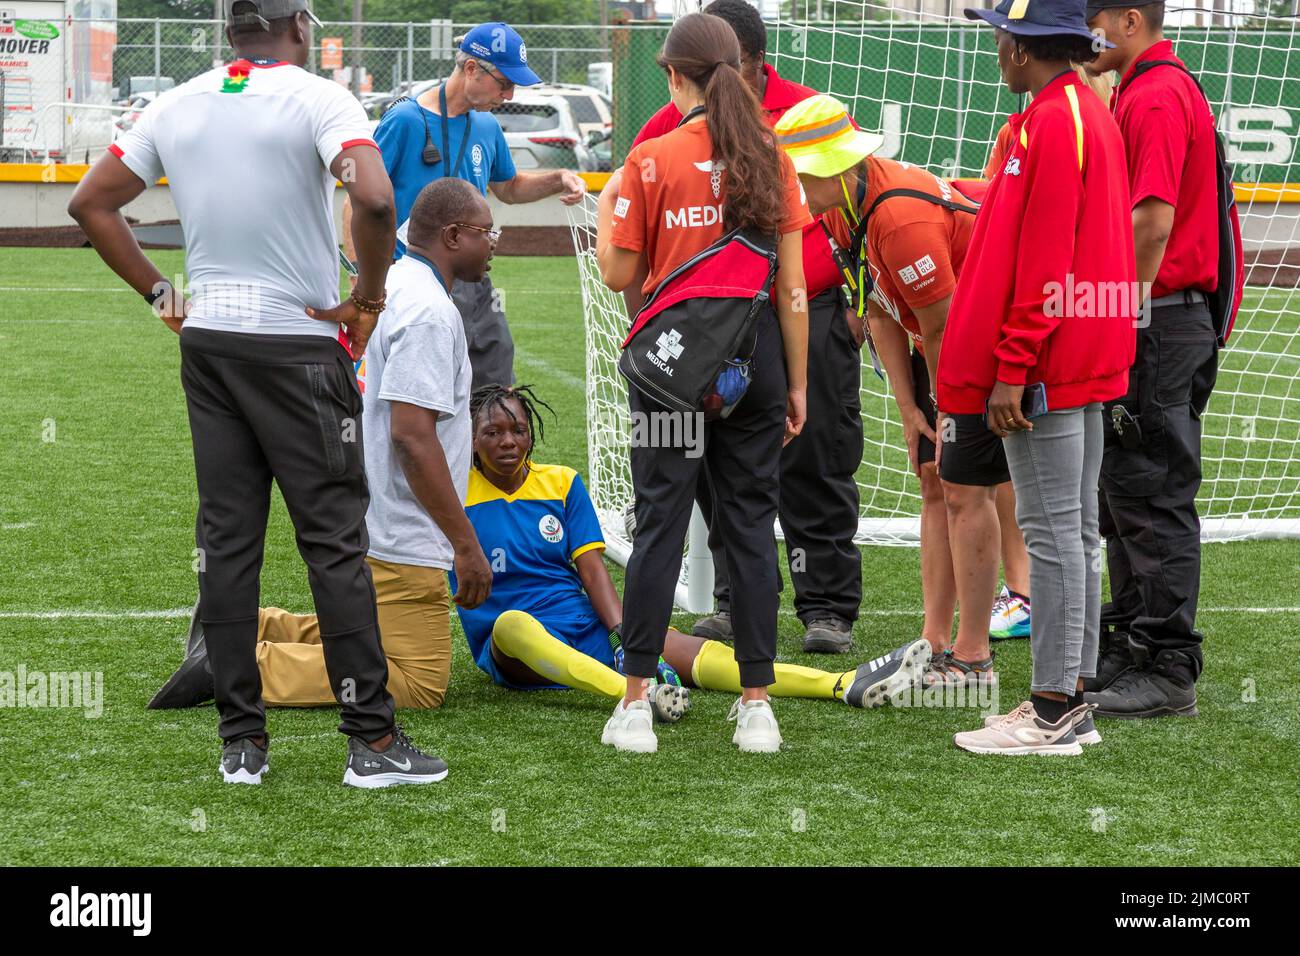 Detroit, Michigan - Medical staff attends to an injured player during the Special Olympics Unified Cup football (soccer) tournament. The Unified Cup p Stock Photo